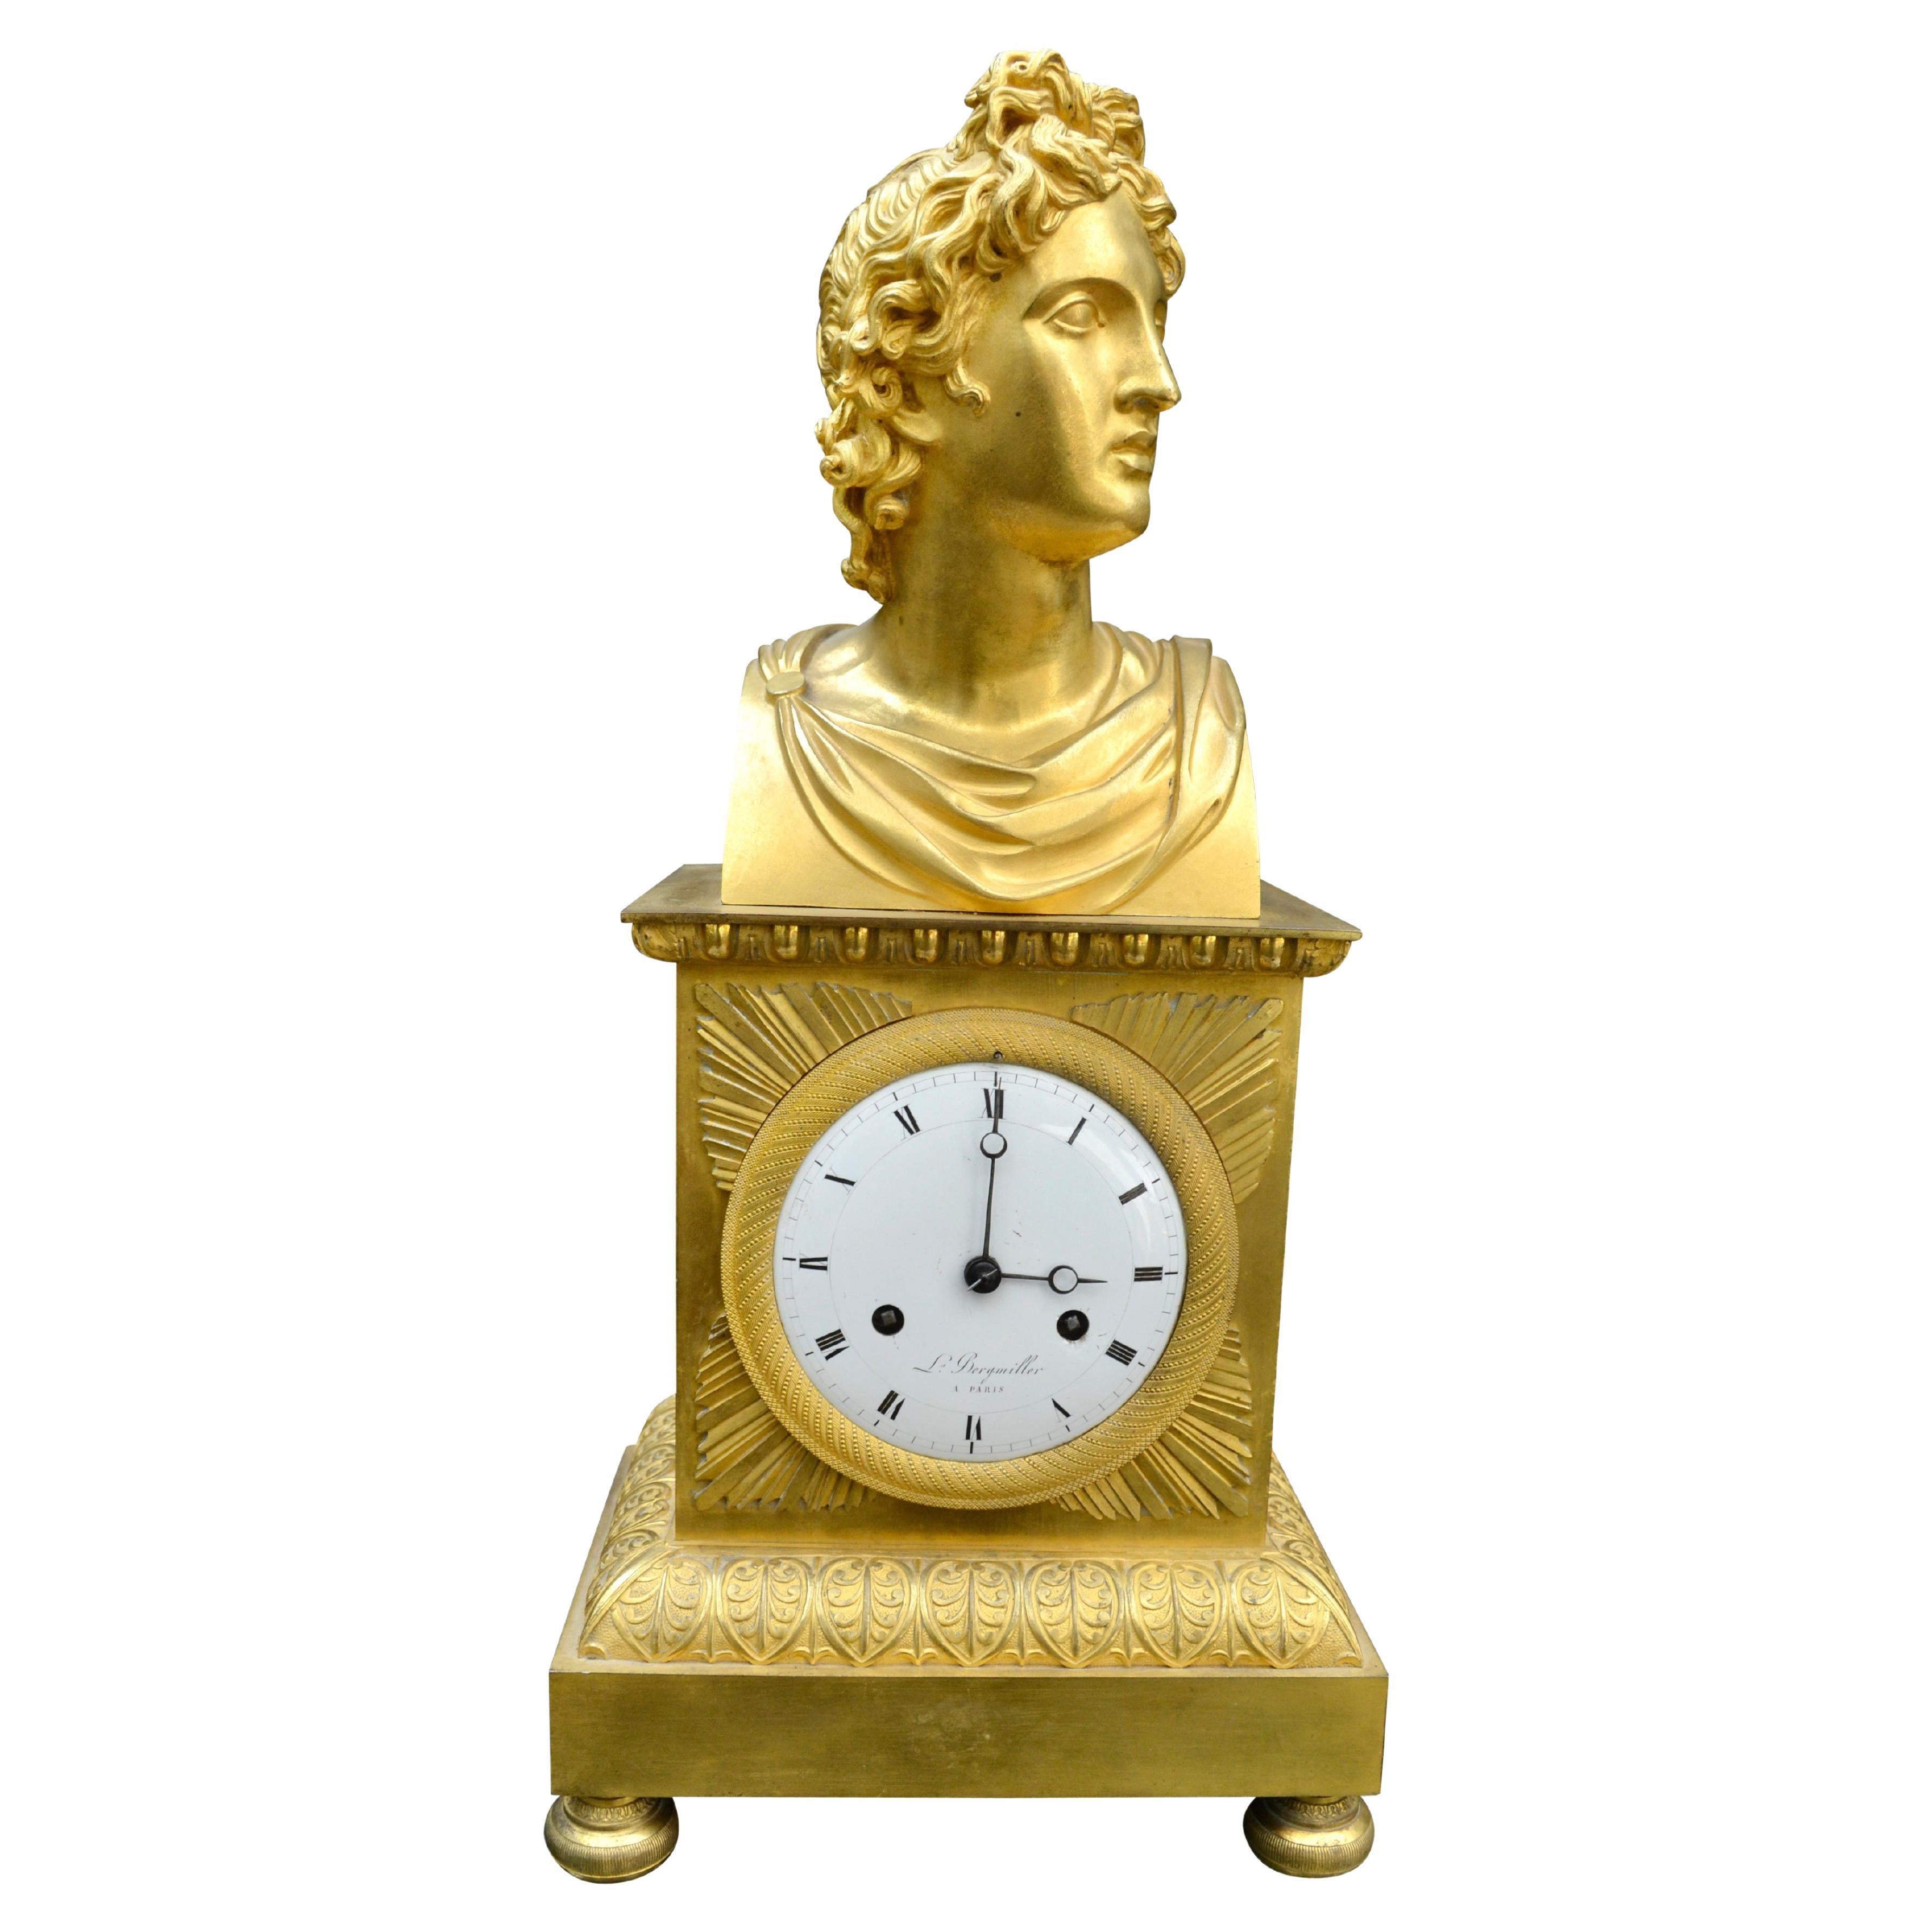 French Empire Gilt Bronze Clock with Bust of Apollo Belvedere